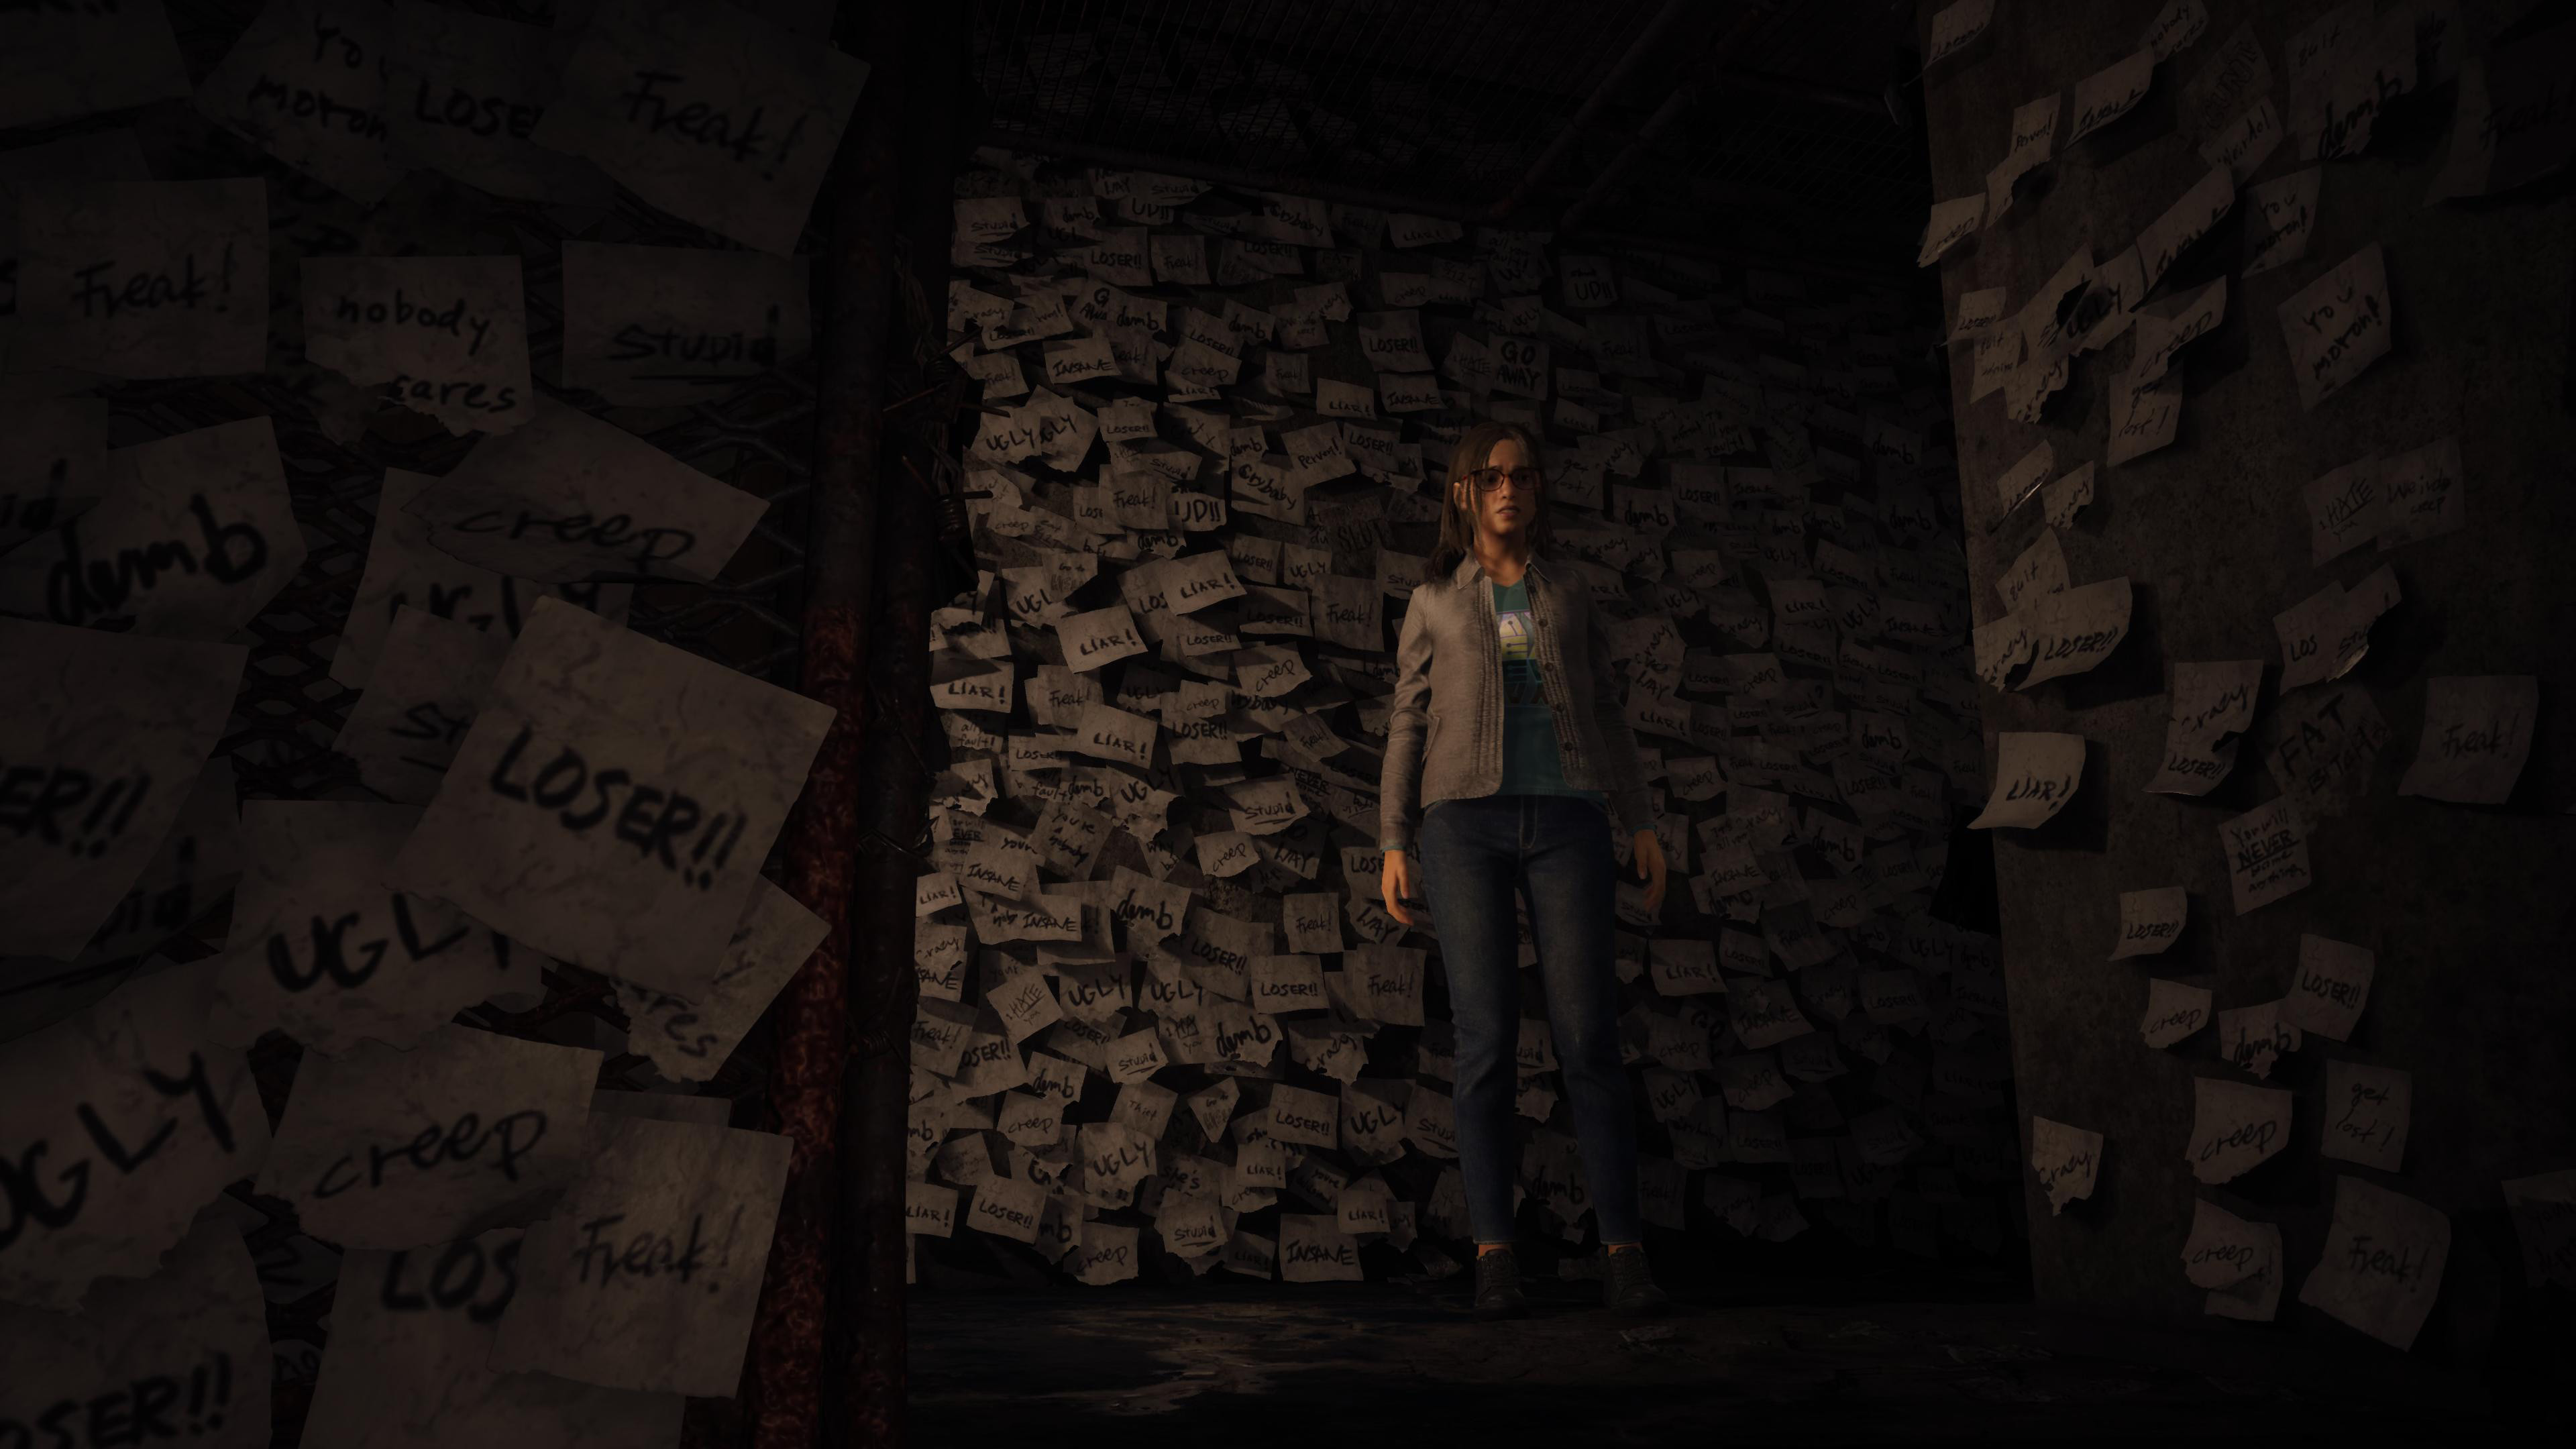 A character at the crossroads of a small alleyway. Covering the surfaces of the wall around them are hundreds of post-it notes, each with a different, singular, abusive word scrawled upon the paper.